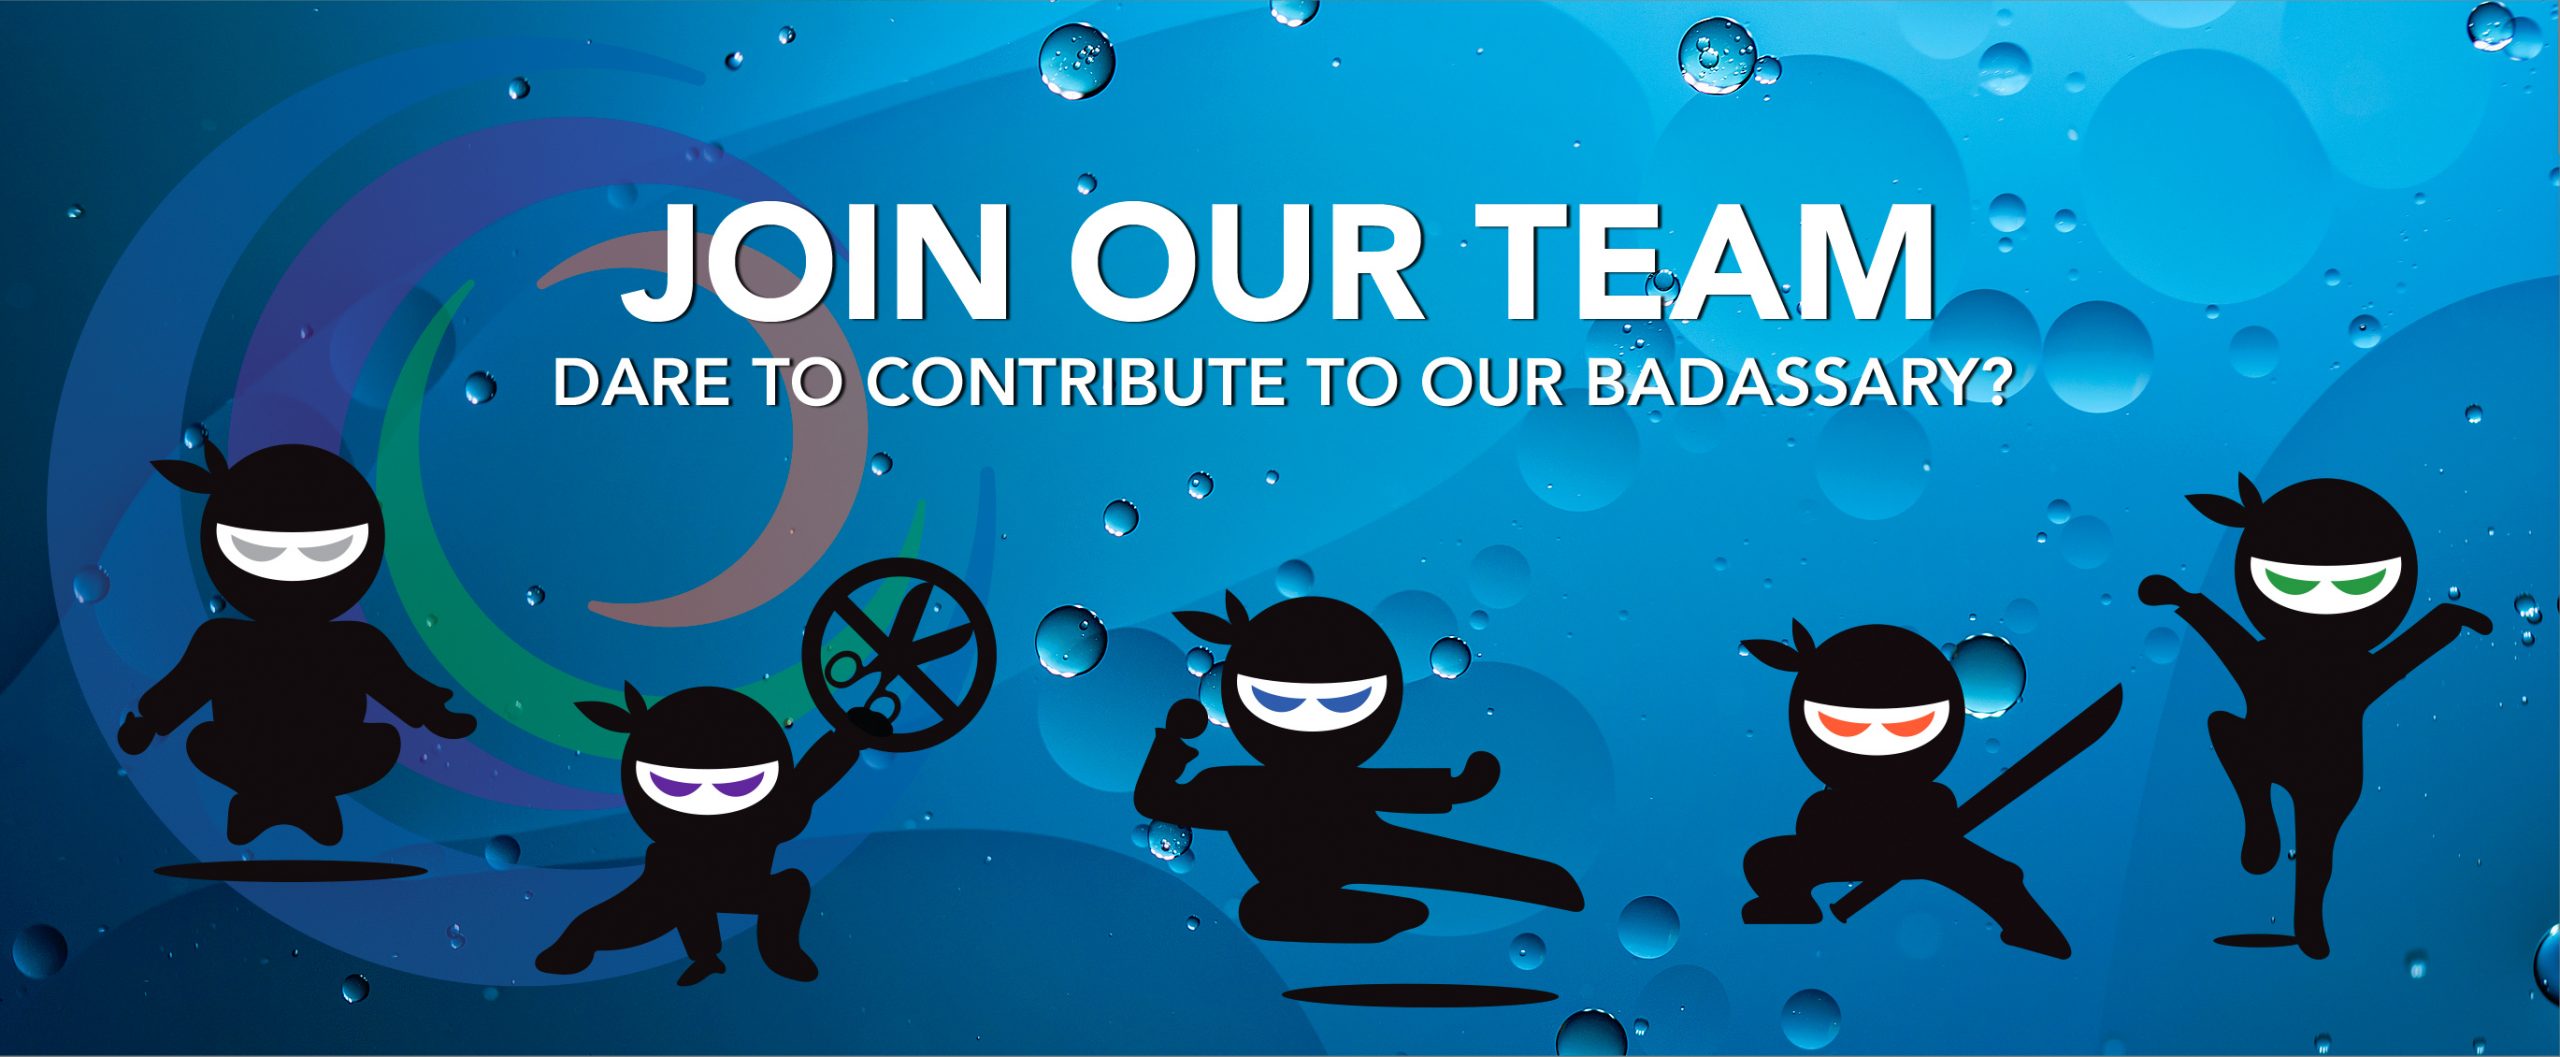 Graphic of five ninjas and text saying "Join our team. Dare to contribute to our badassary?"